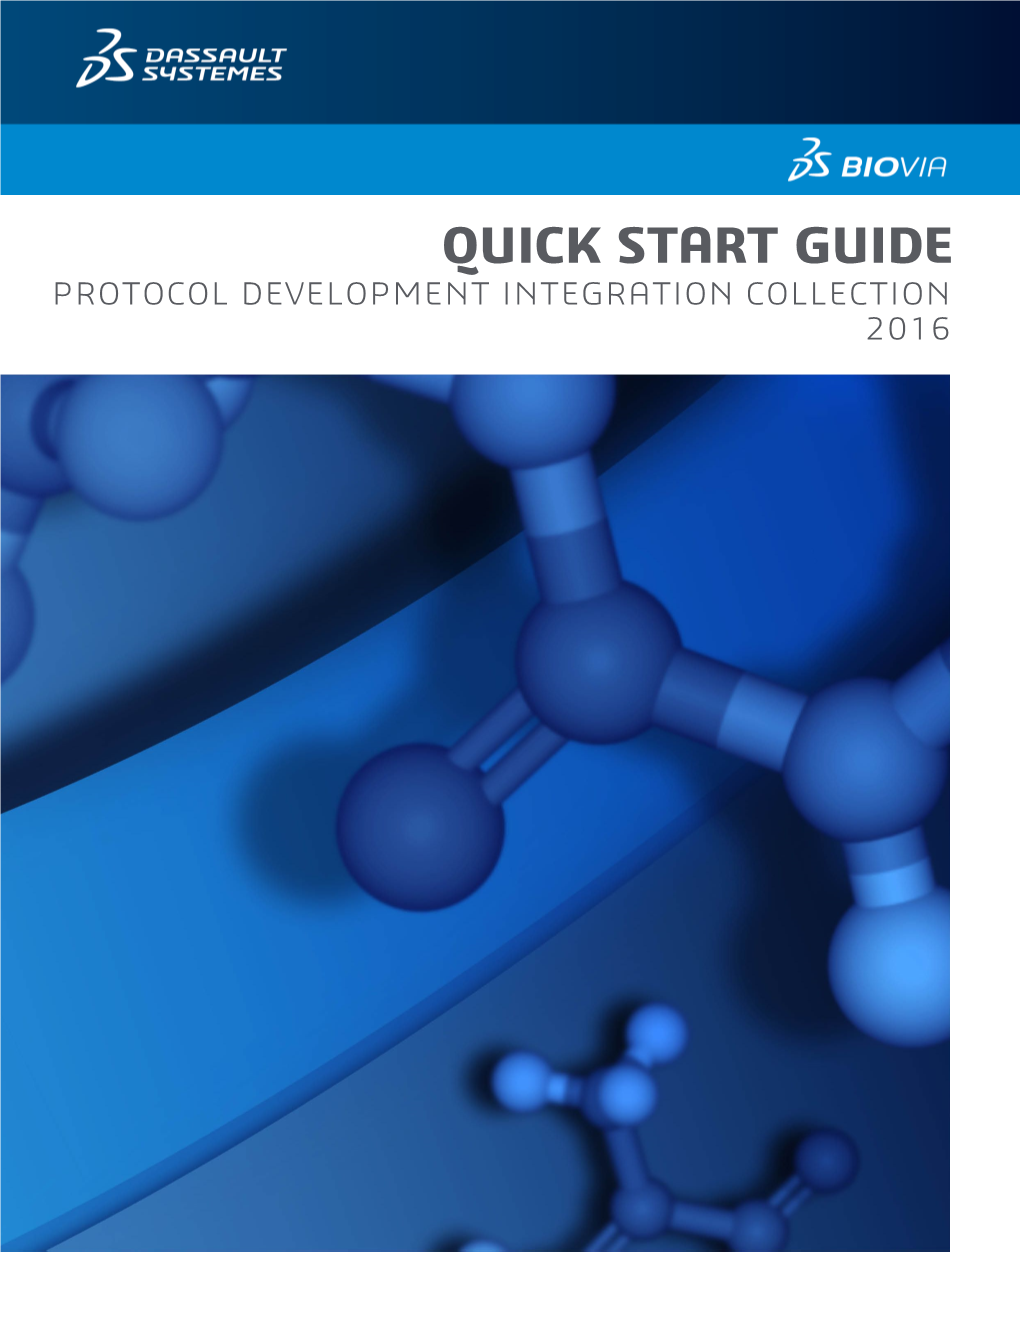 QUICK START GUIDE PROTOCOL DEVELOPMENT INTEGRATION COLLECTION 2016 Copyright Notice